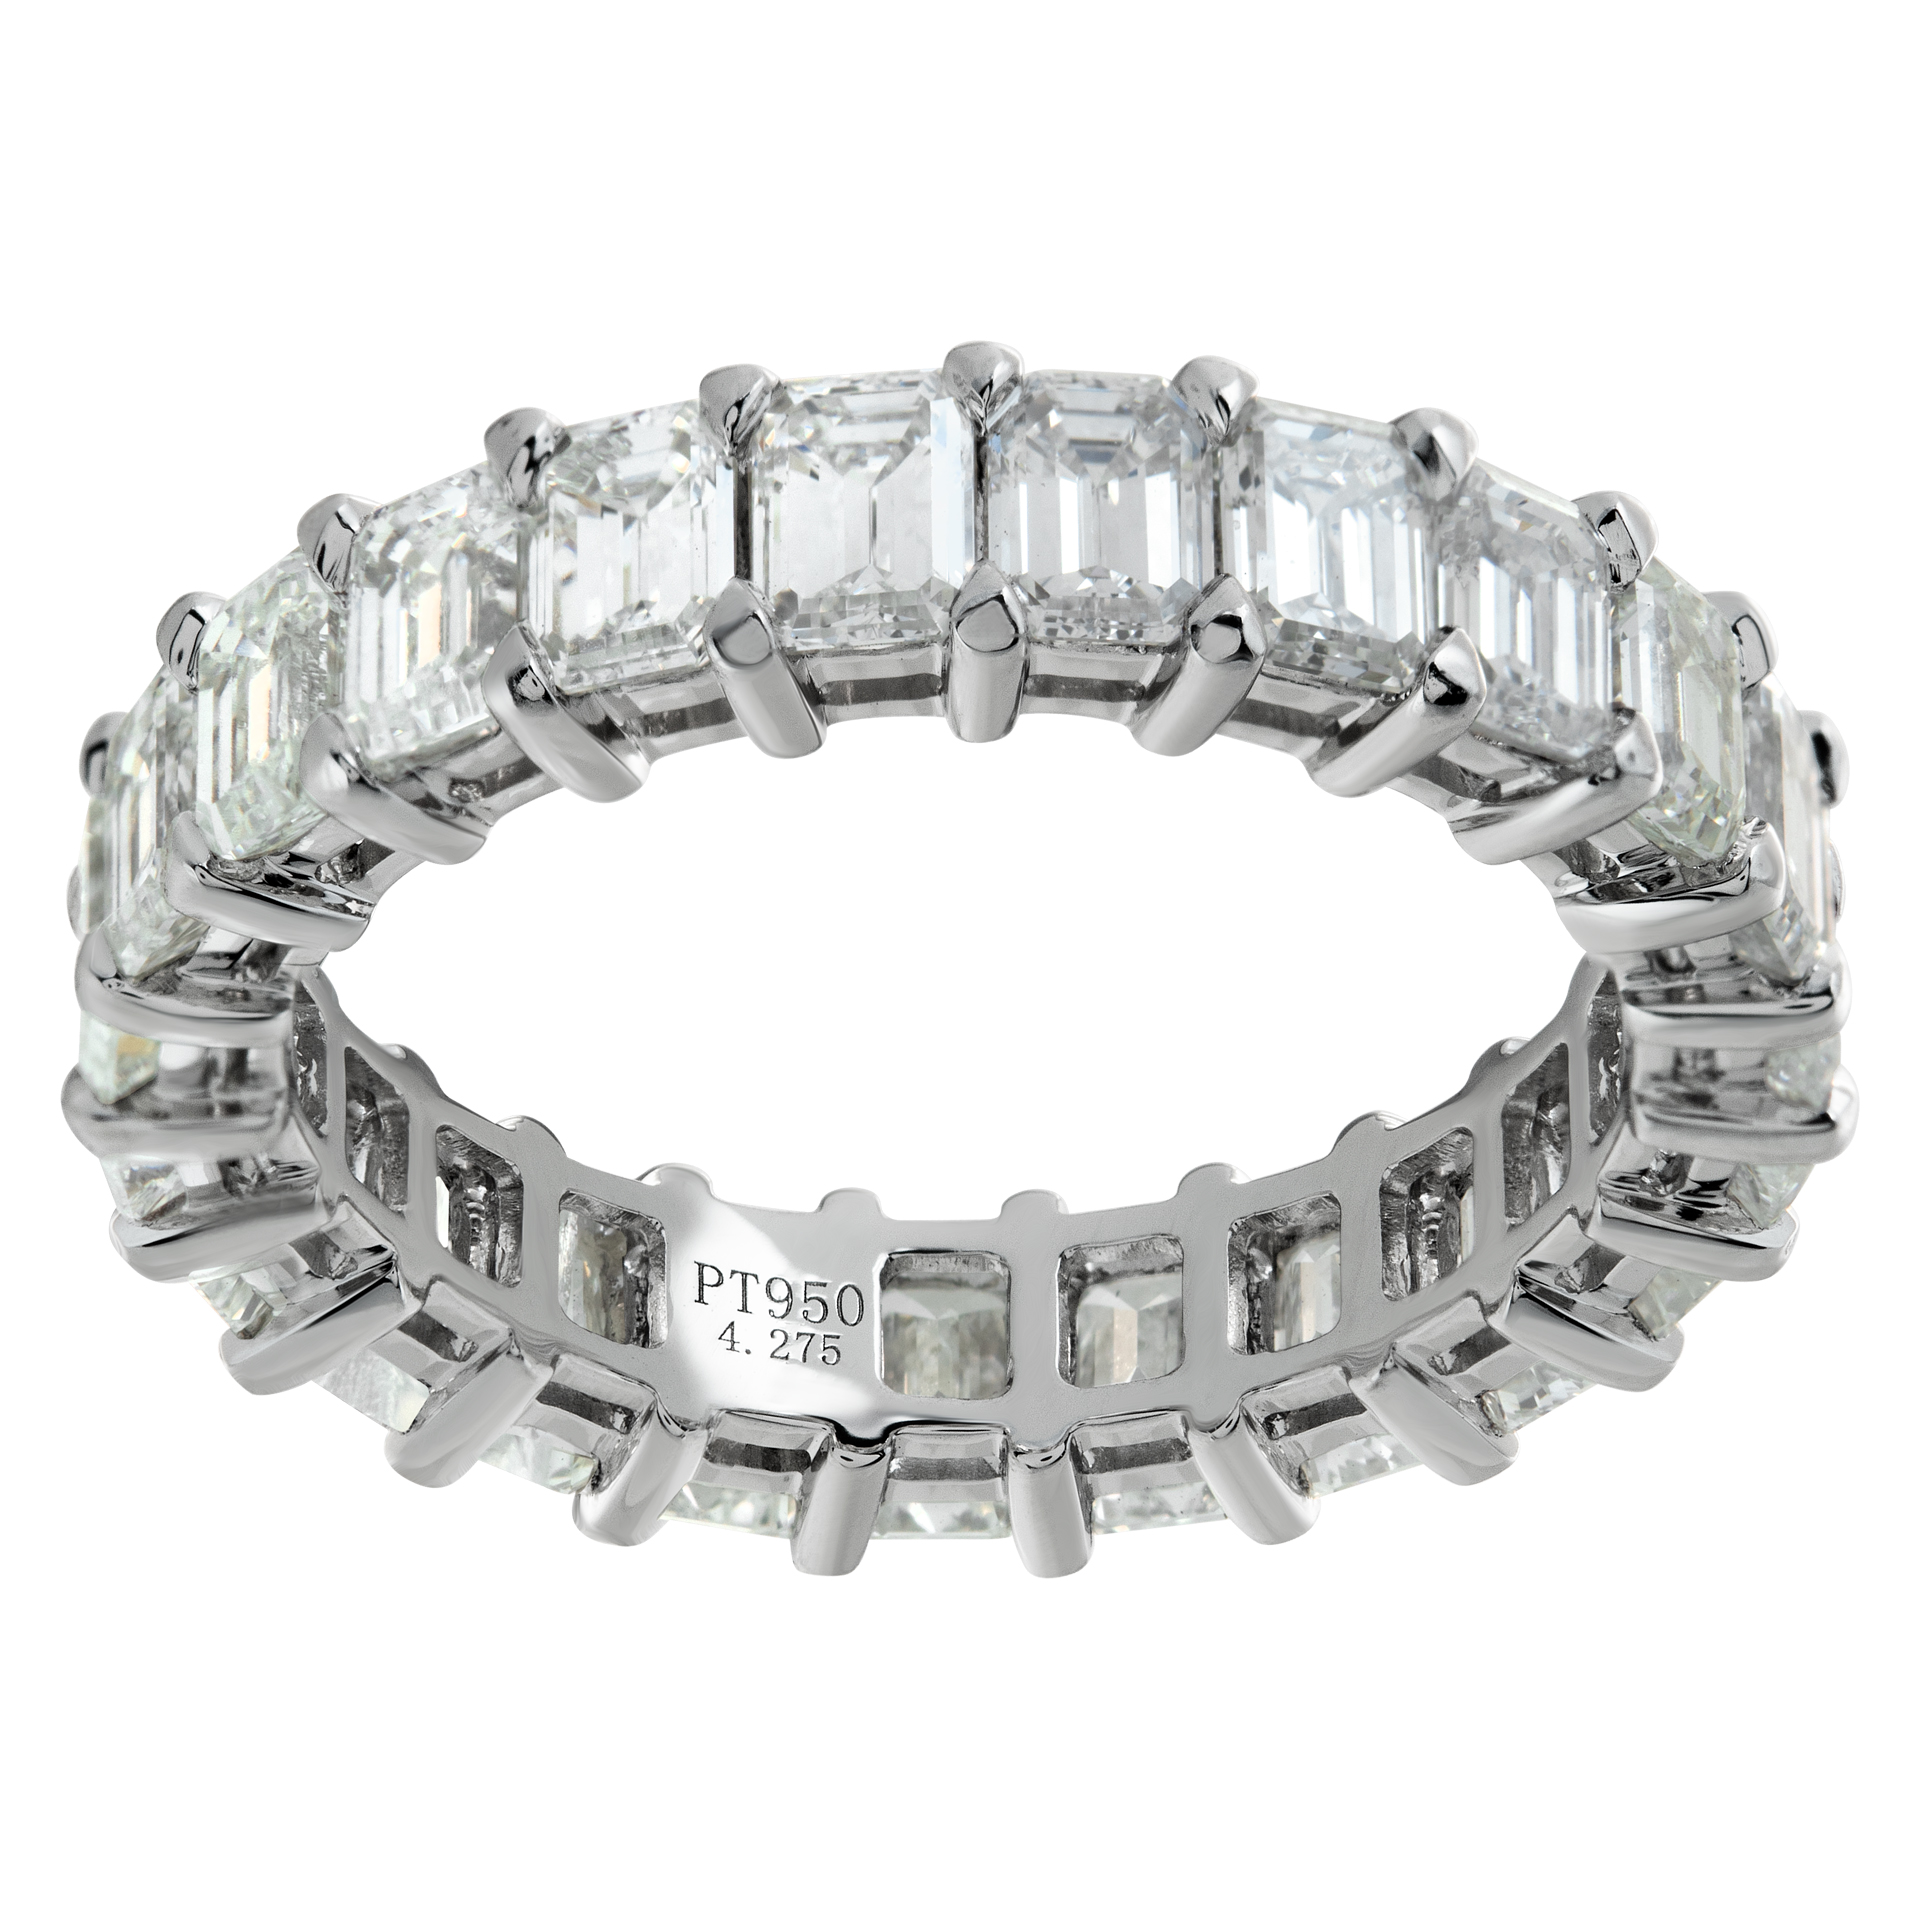 Emerald cut diamond eternity band 4.25 carats in G-H color, VS clarity